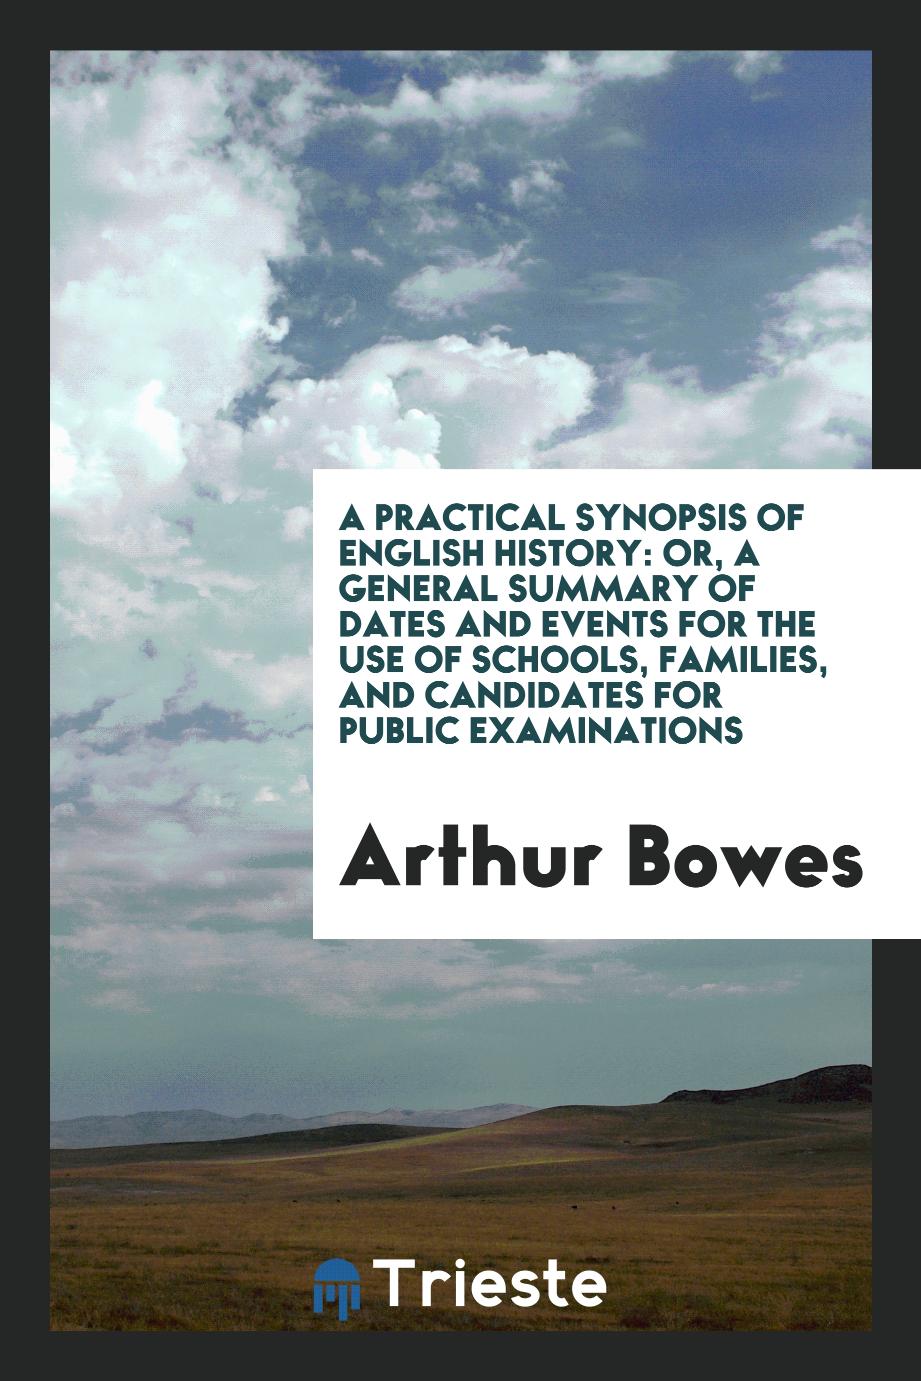 A Practical Synopsis of English History: Or, A General Summary of Dates and events for the use of schools, families, and candidates for public examinations